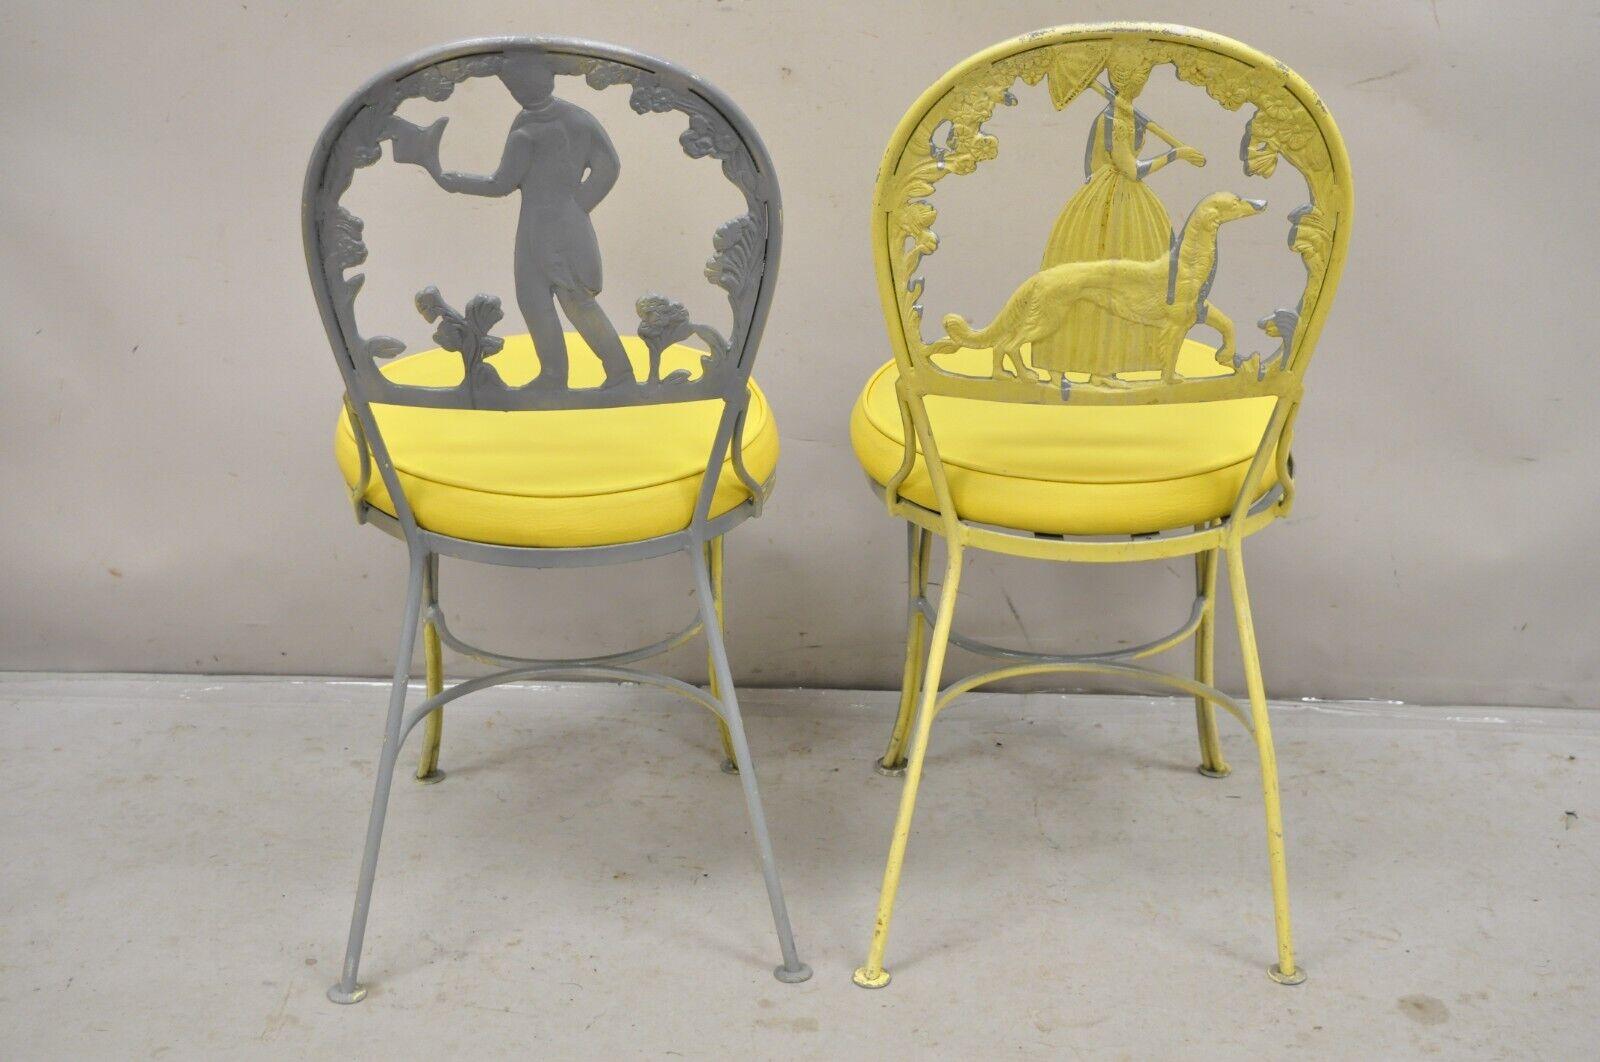 Victorian Style Cast Aluminum Courting Scene Garden Patio Bistro Chairs - a Pair For Sale 4